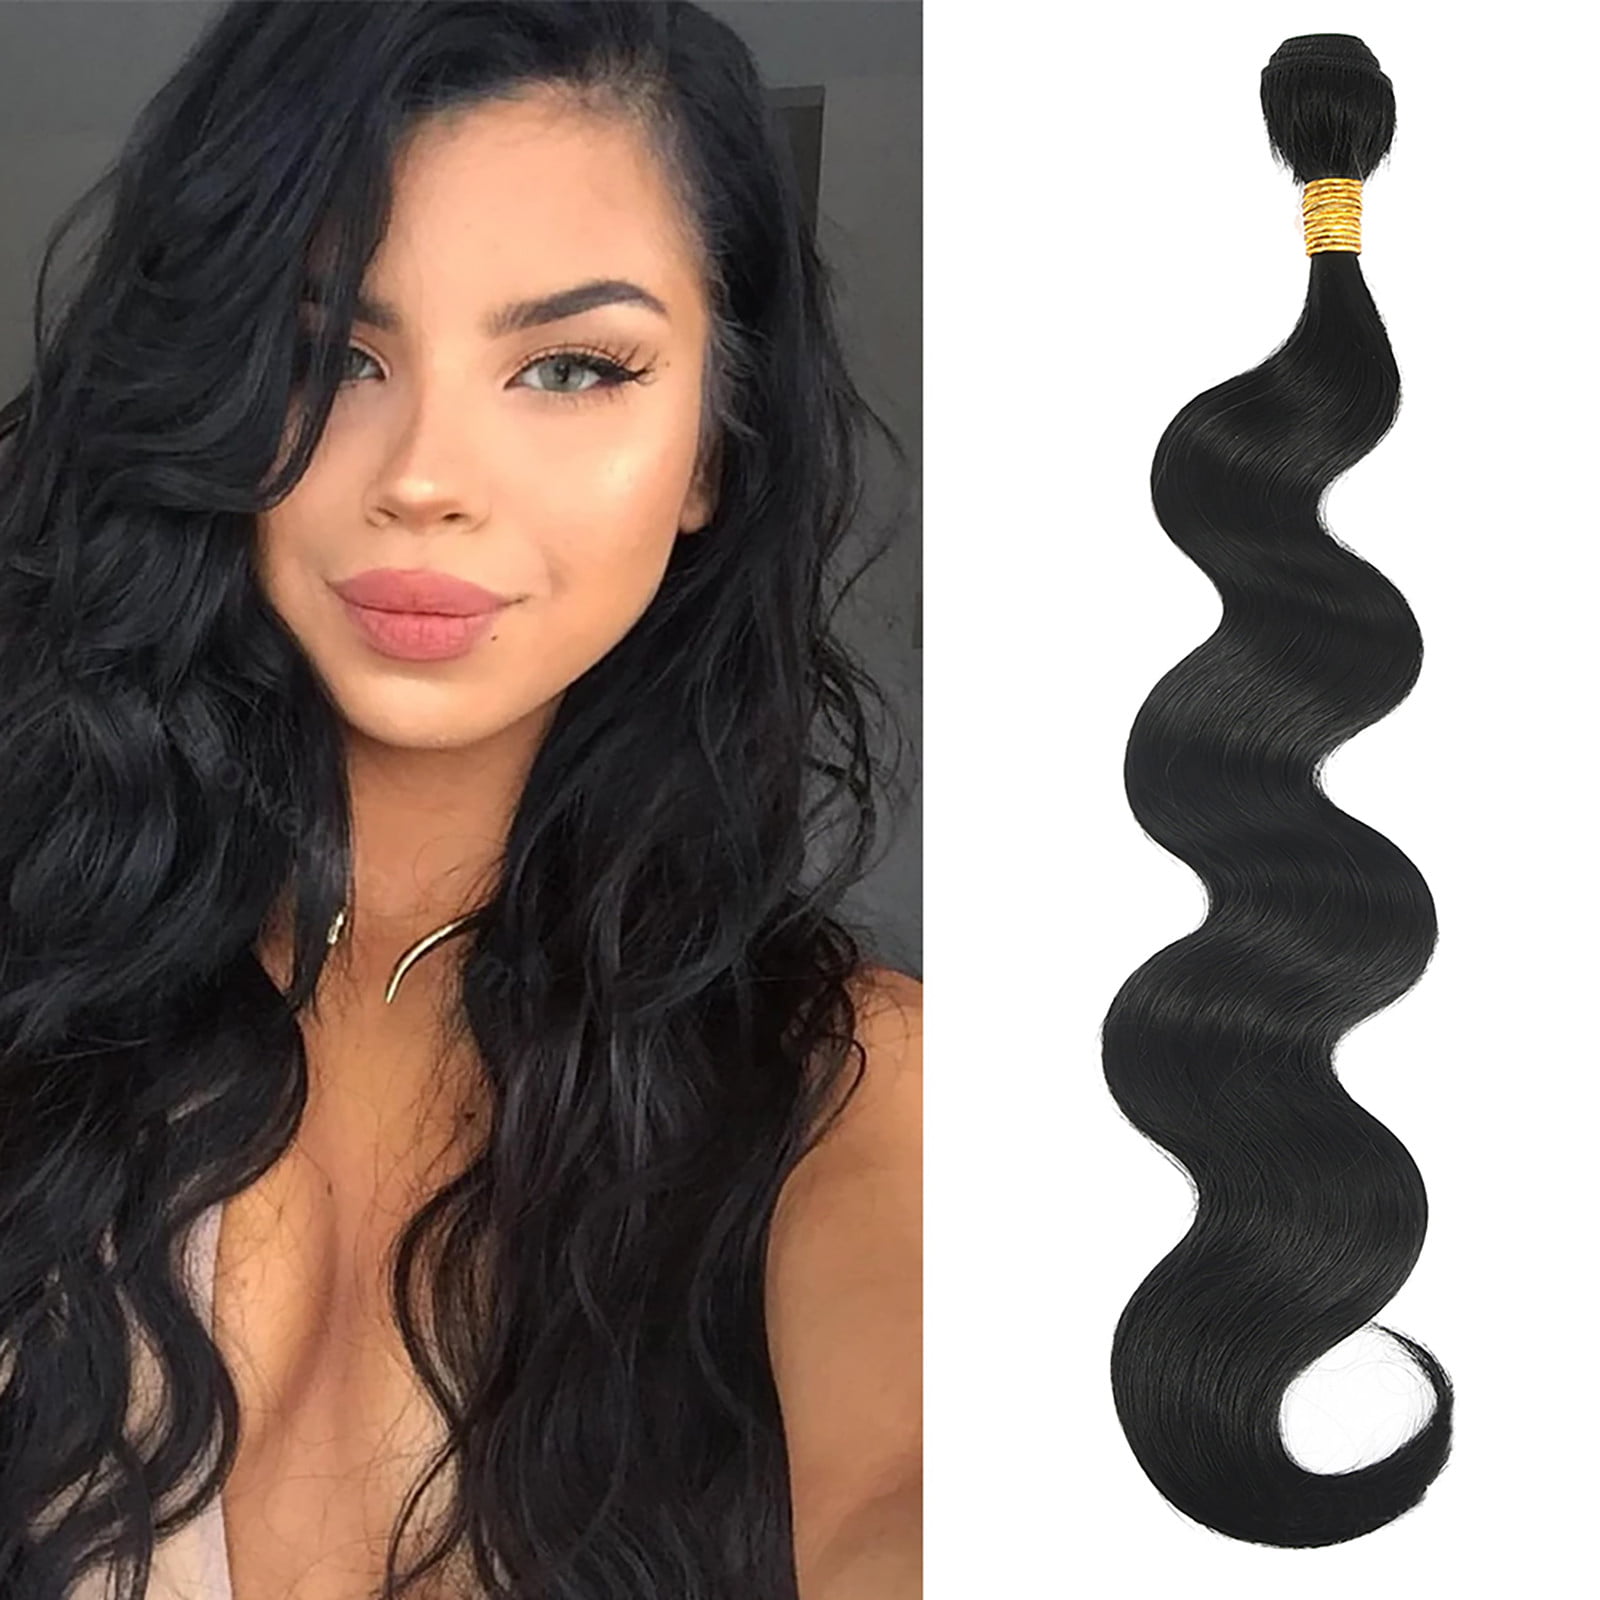 Sunny Sew in Hair Extensions Human Hair Natural Black Ombre Dark Brown with  Ash Brown 24 inch Hair Weft Remy Bundles 100g  Walmartcom